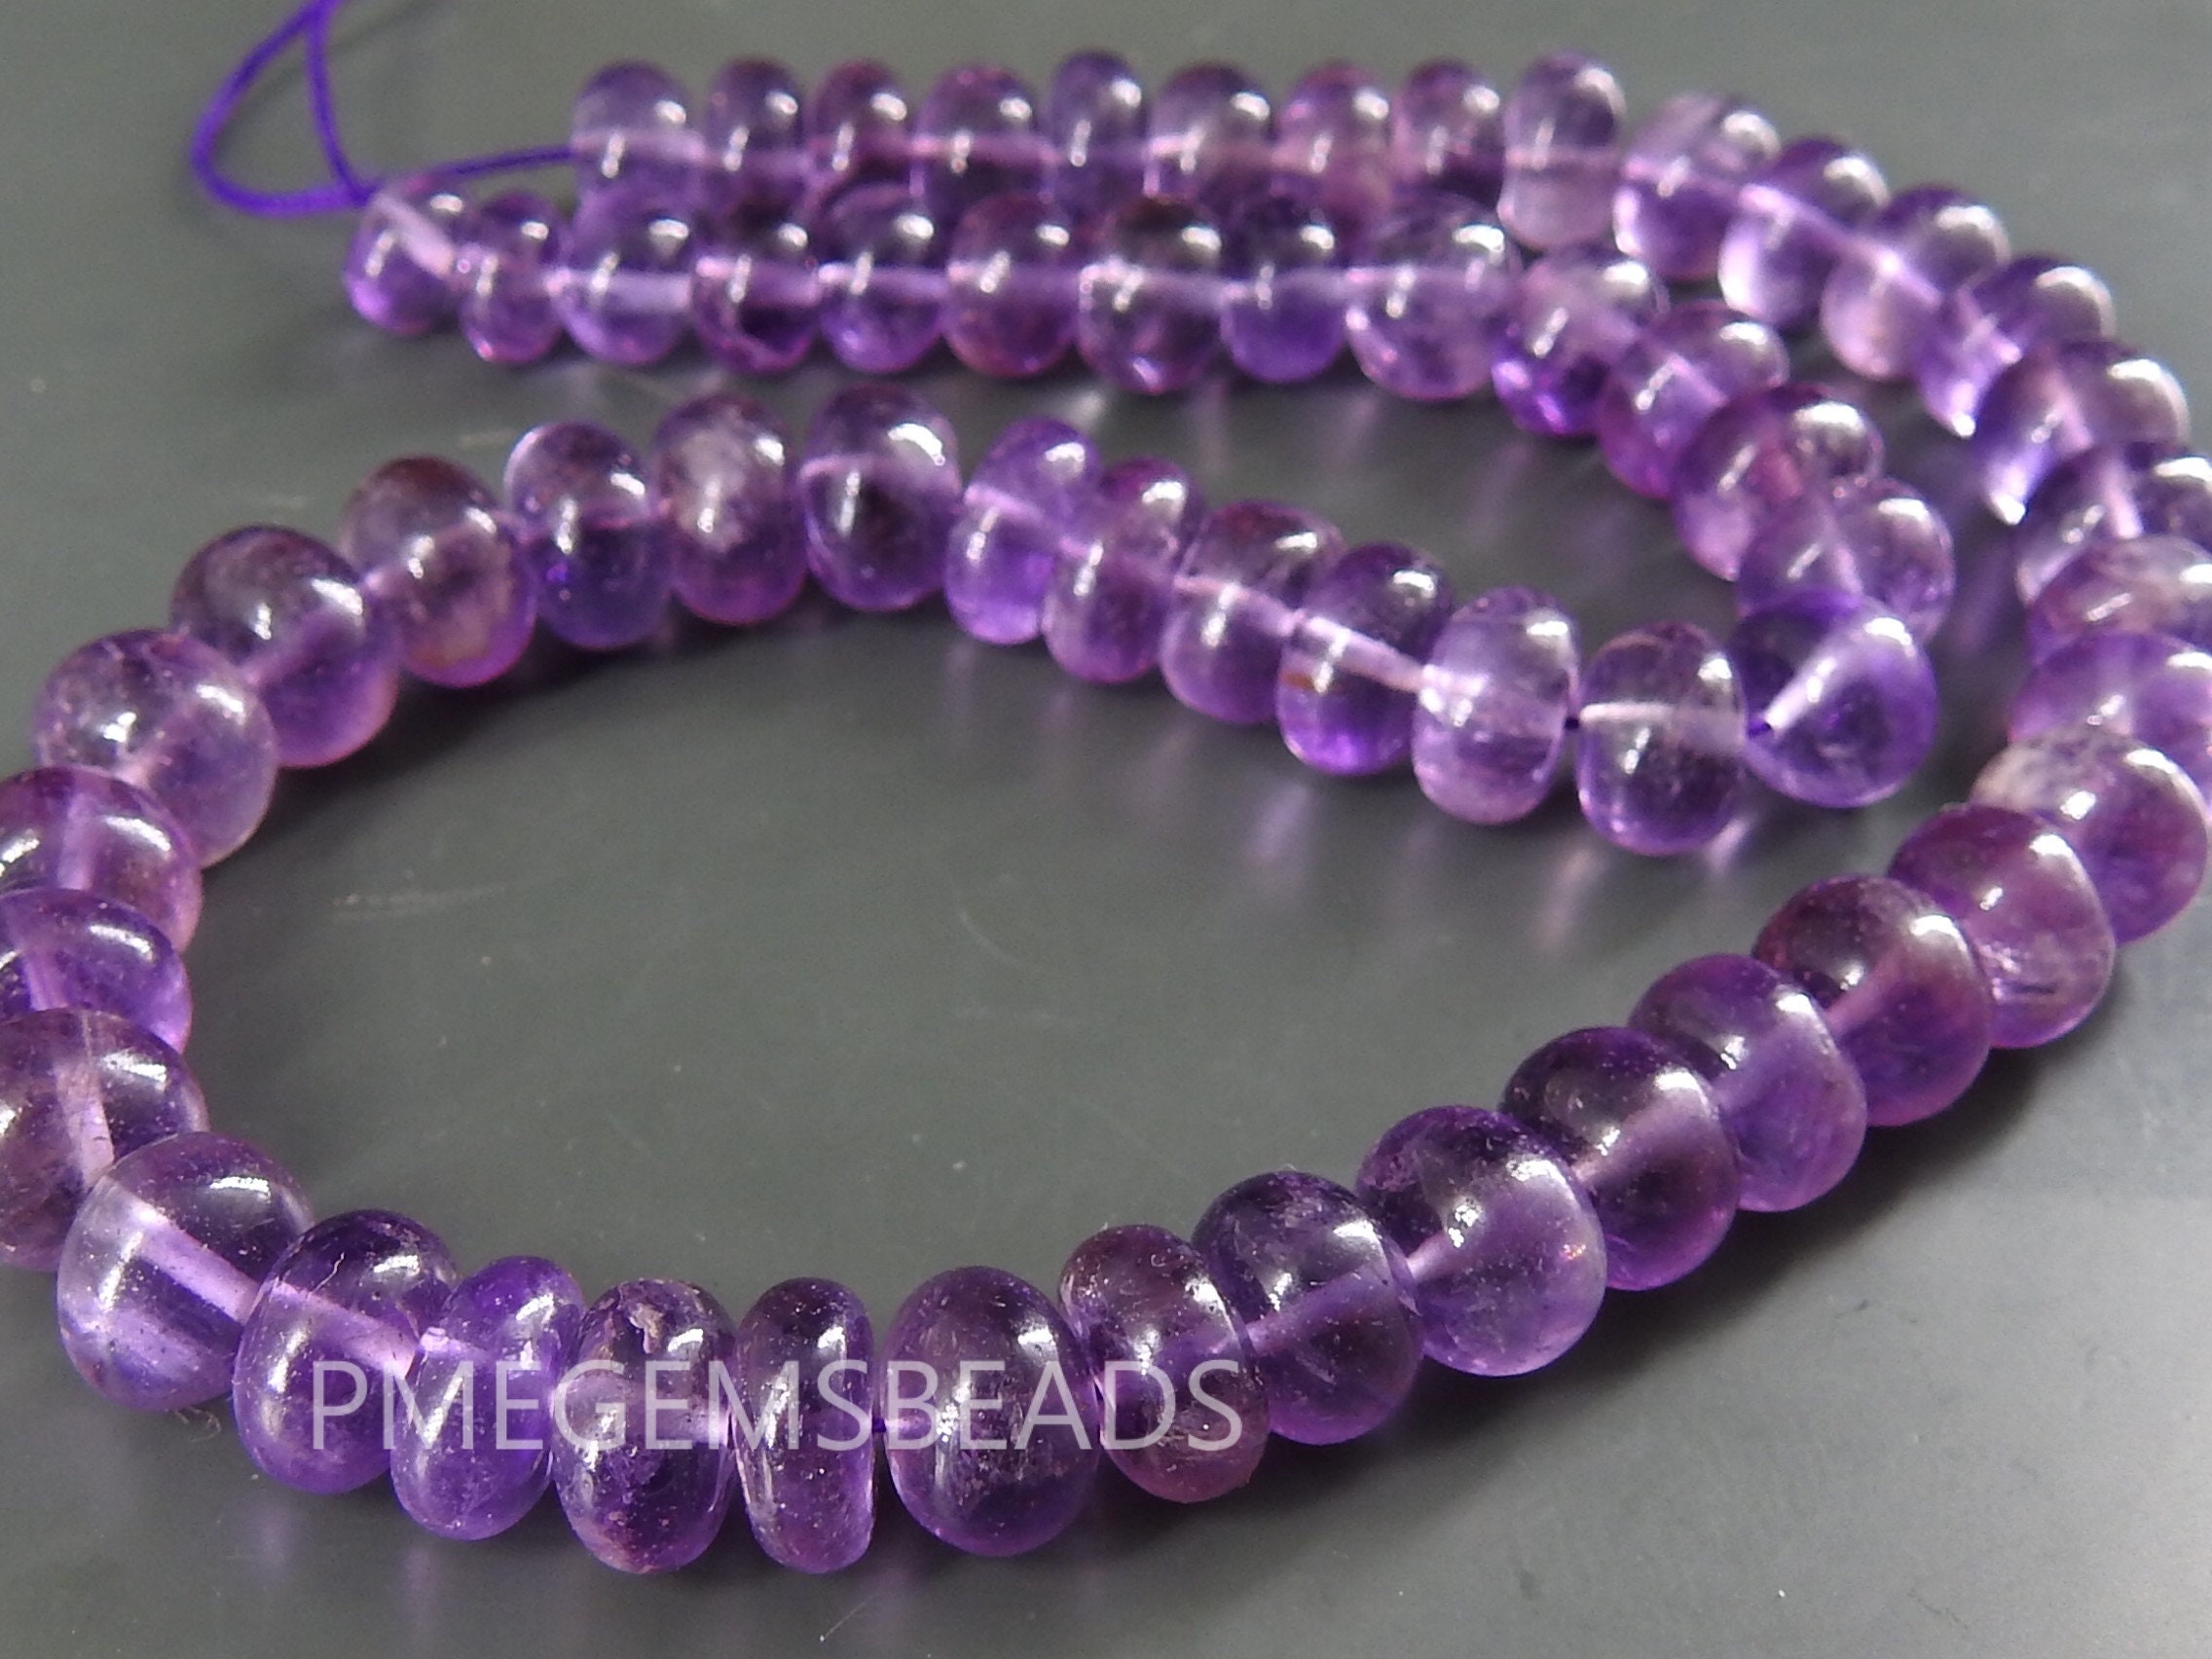 Amethyst Smooth Roundel Beads,Handmade,Loose Stone,For Making Jewelry,Necklace,12Inch Strand,Wholesaler,Supplies,100%Natural PME-B9 | Save 33% - Rajasthan Living 12